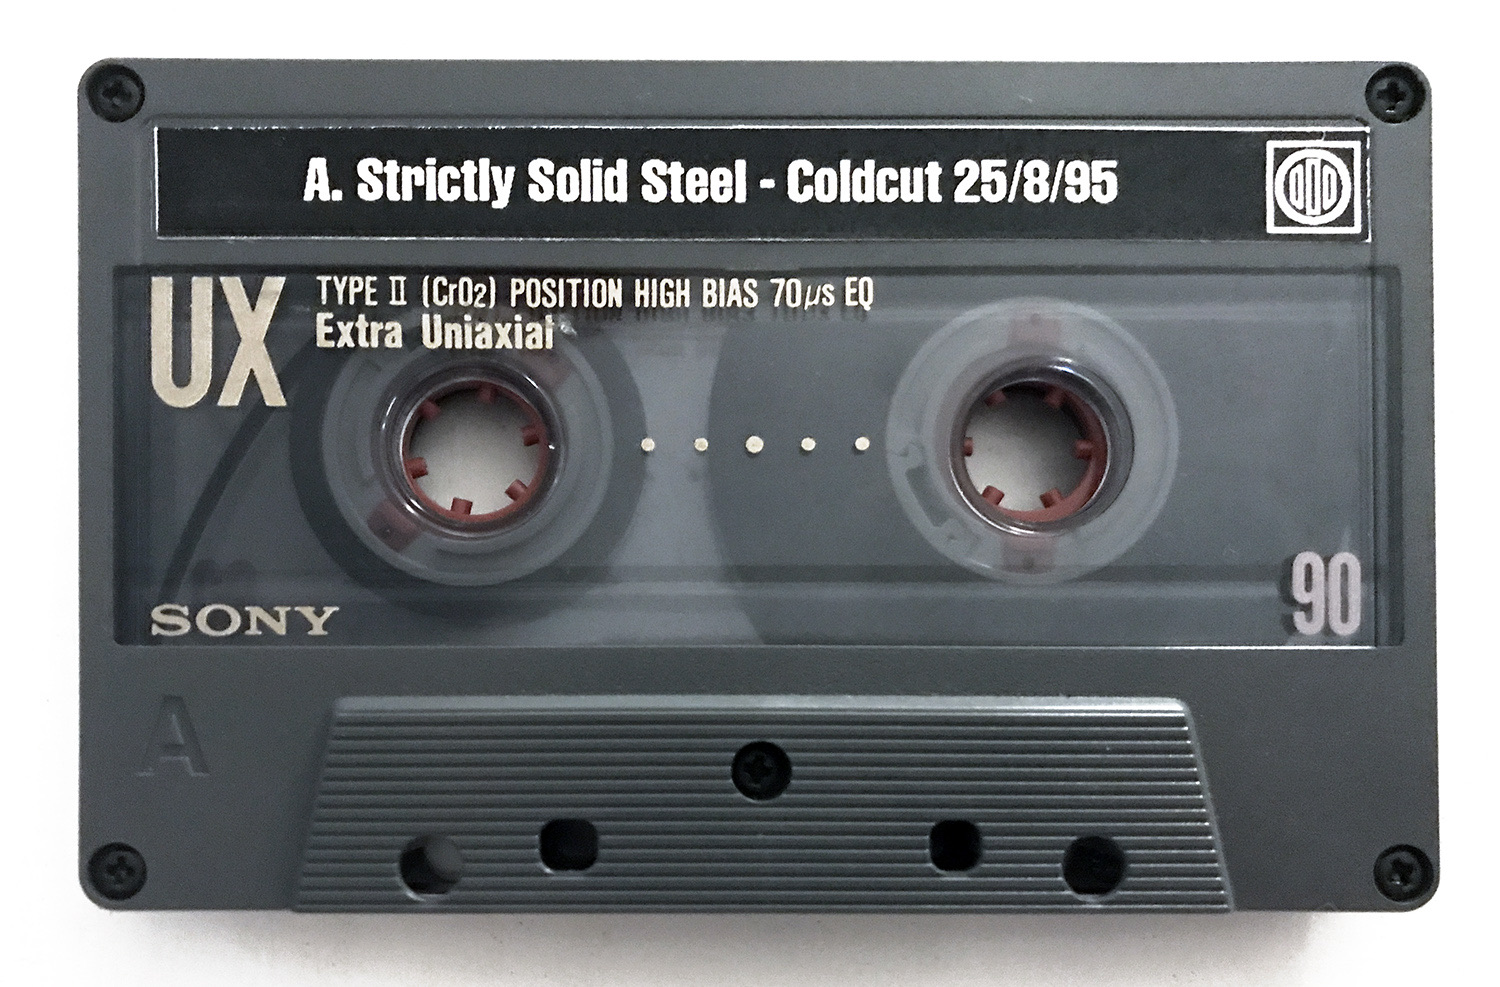 MS155 Strictly Solid Steel 25:08:1995